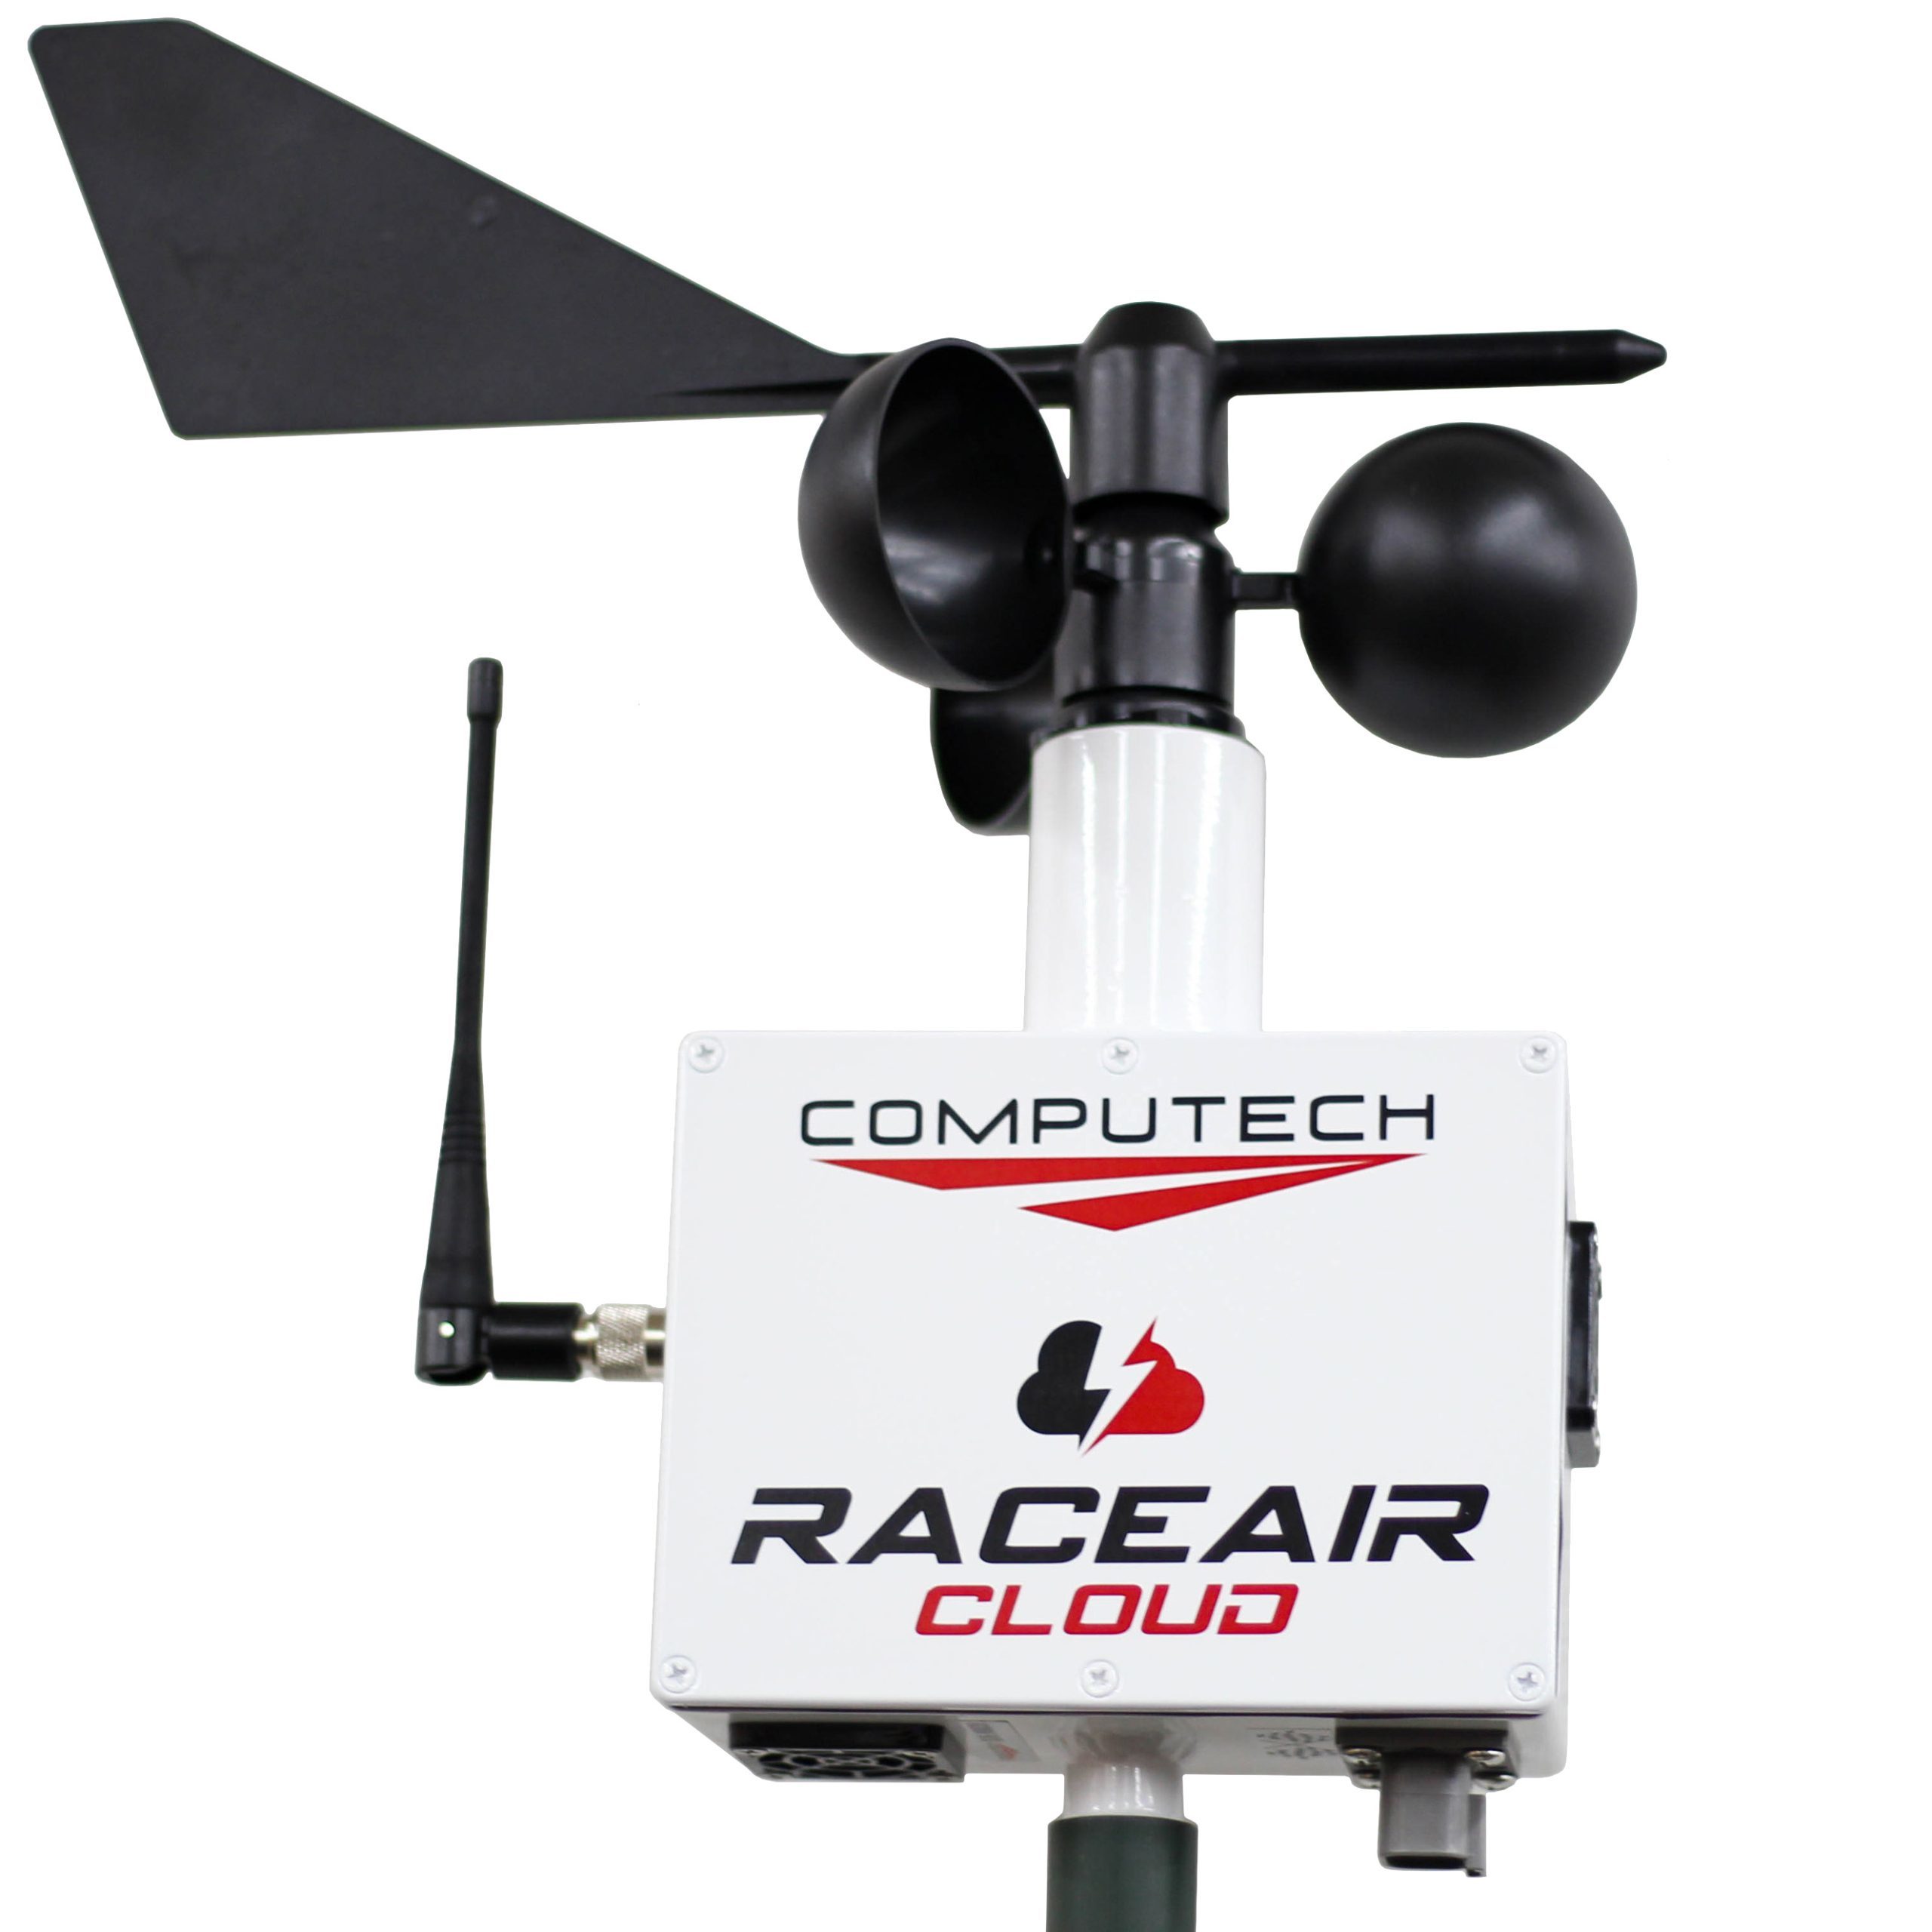 Computech 3315-ET Weather Station, RaceAir Cloud Deluxe, Wind / Speed Direction, Text / Paging, Software / Pole / Hardware Included, Kit